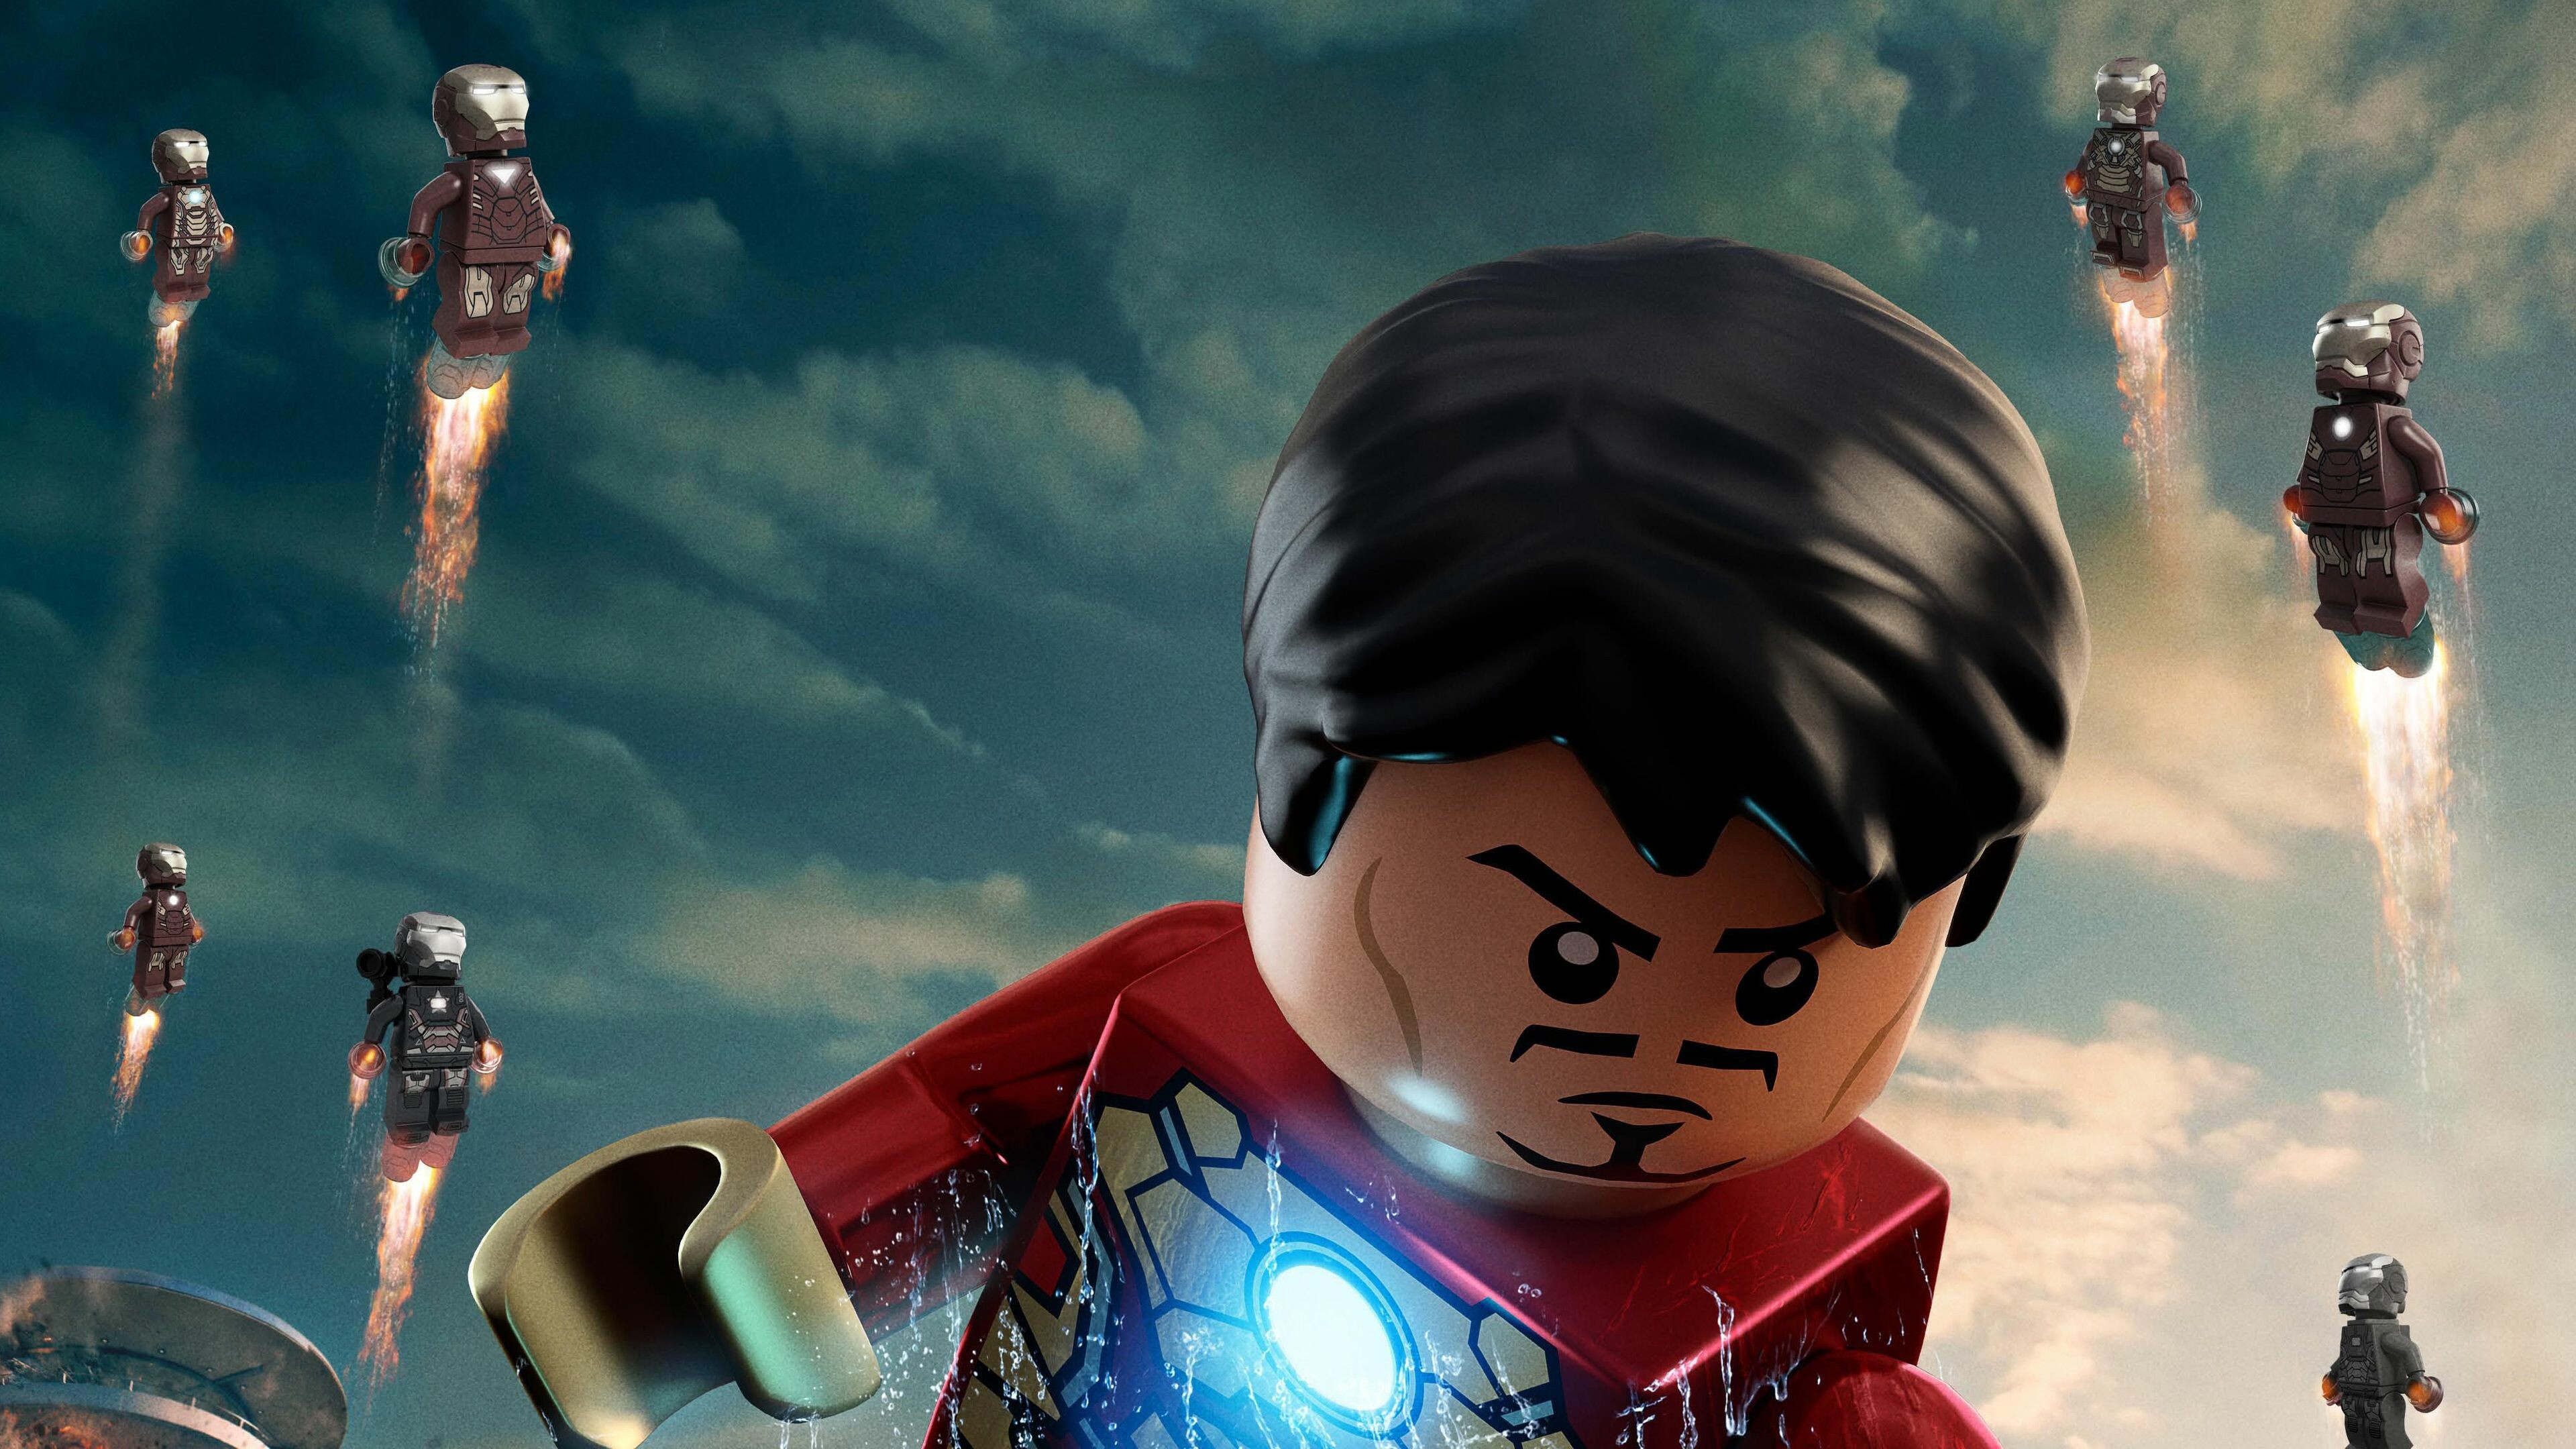 Lego: Iron Man, Types of sets include City, Star Wars, Friends, Technic, and Creator. 3840x2160 4K Wallpaper.